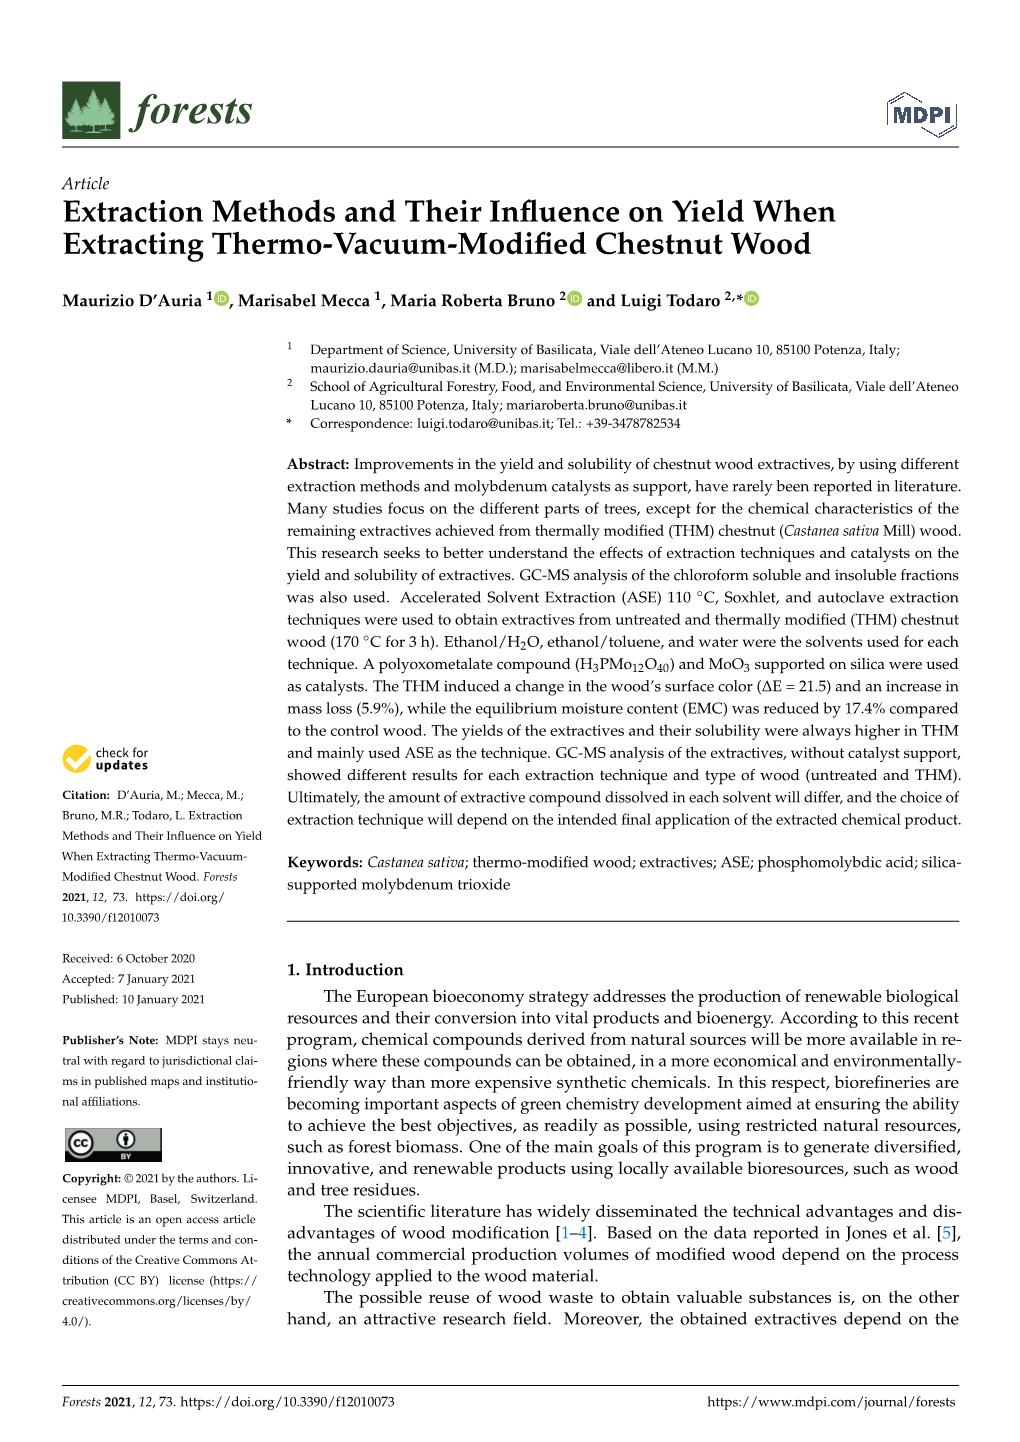 Extraction Methods and Their Influence on Yield When Extracting Thermo-Vacuum-Modified Chestnut Wood